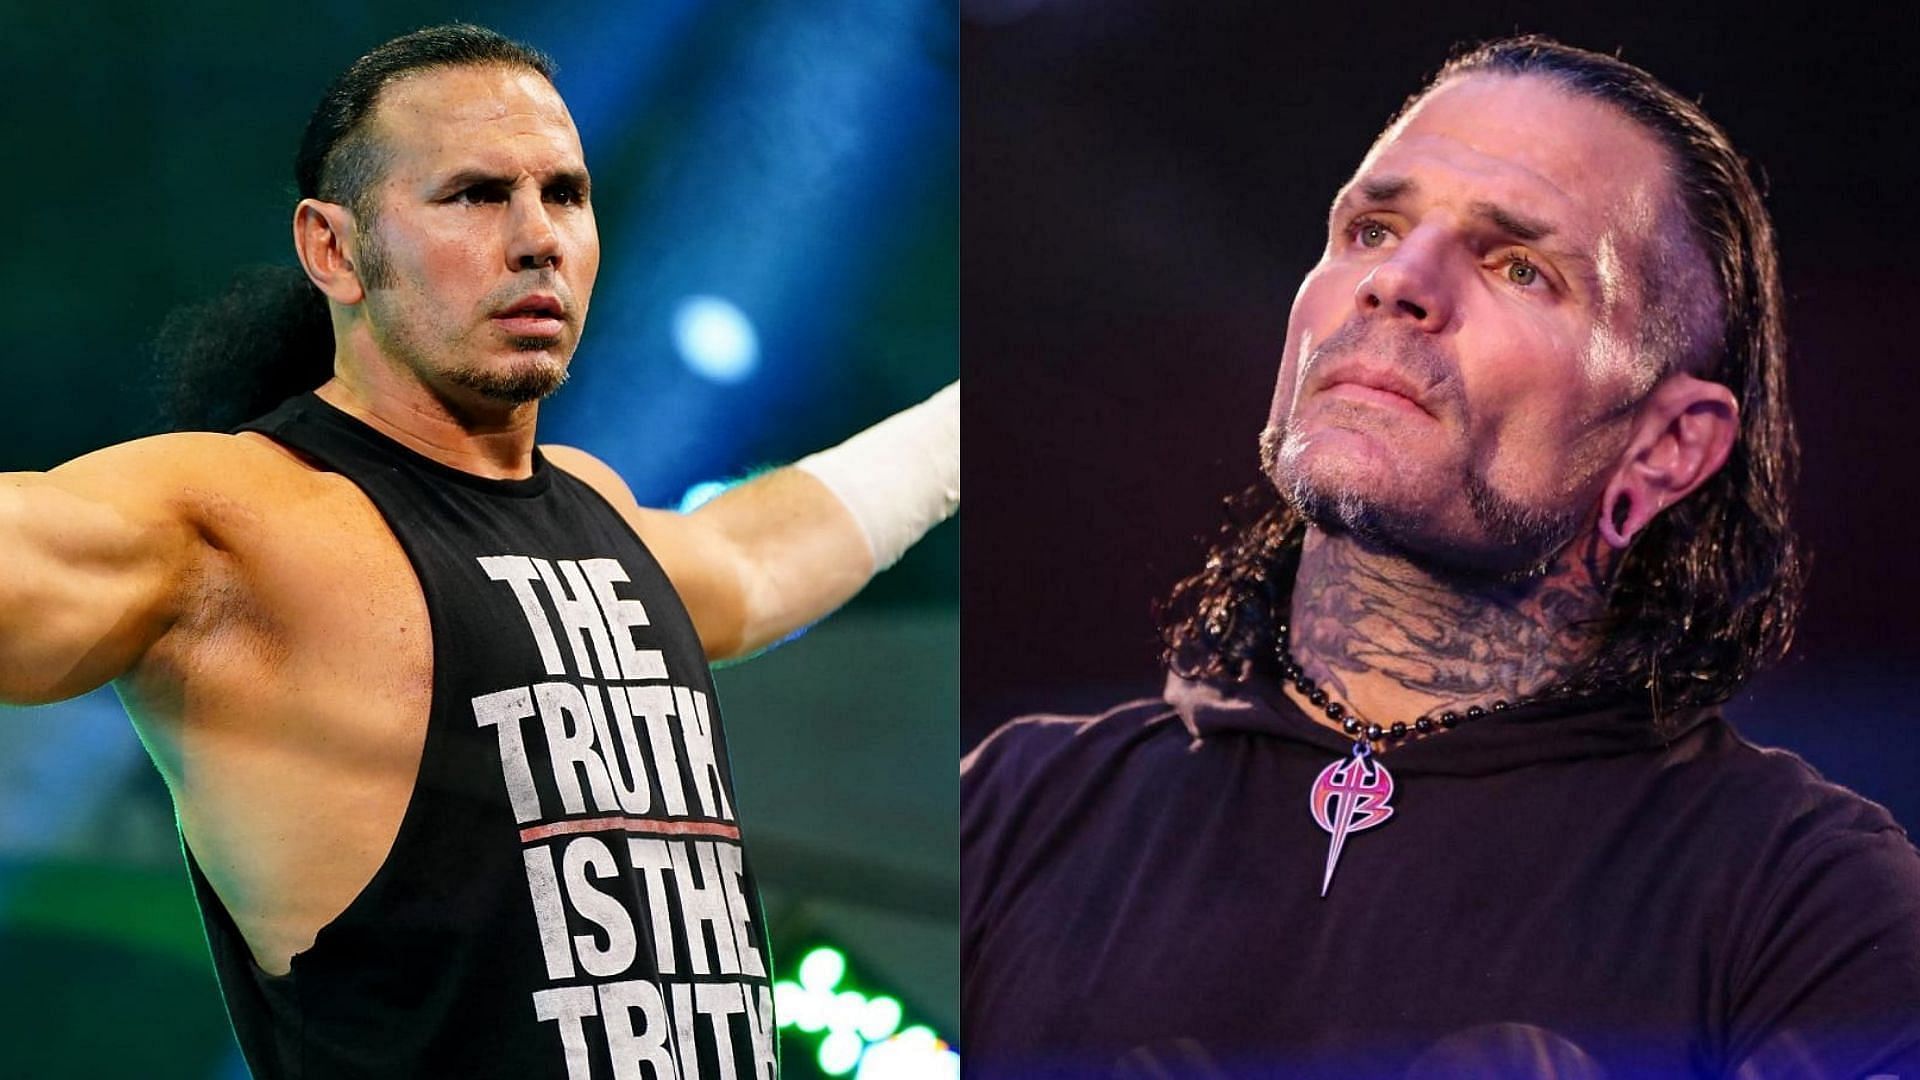 The Hardy Boys would be a dream bout for this team